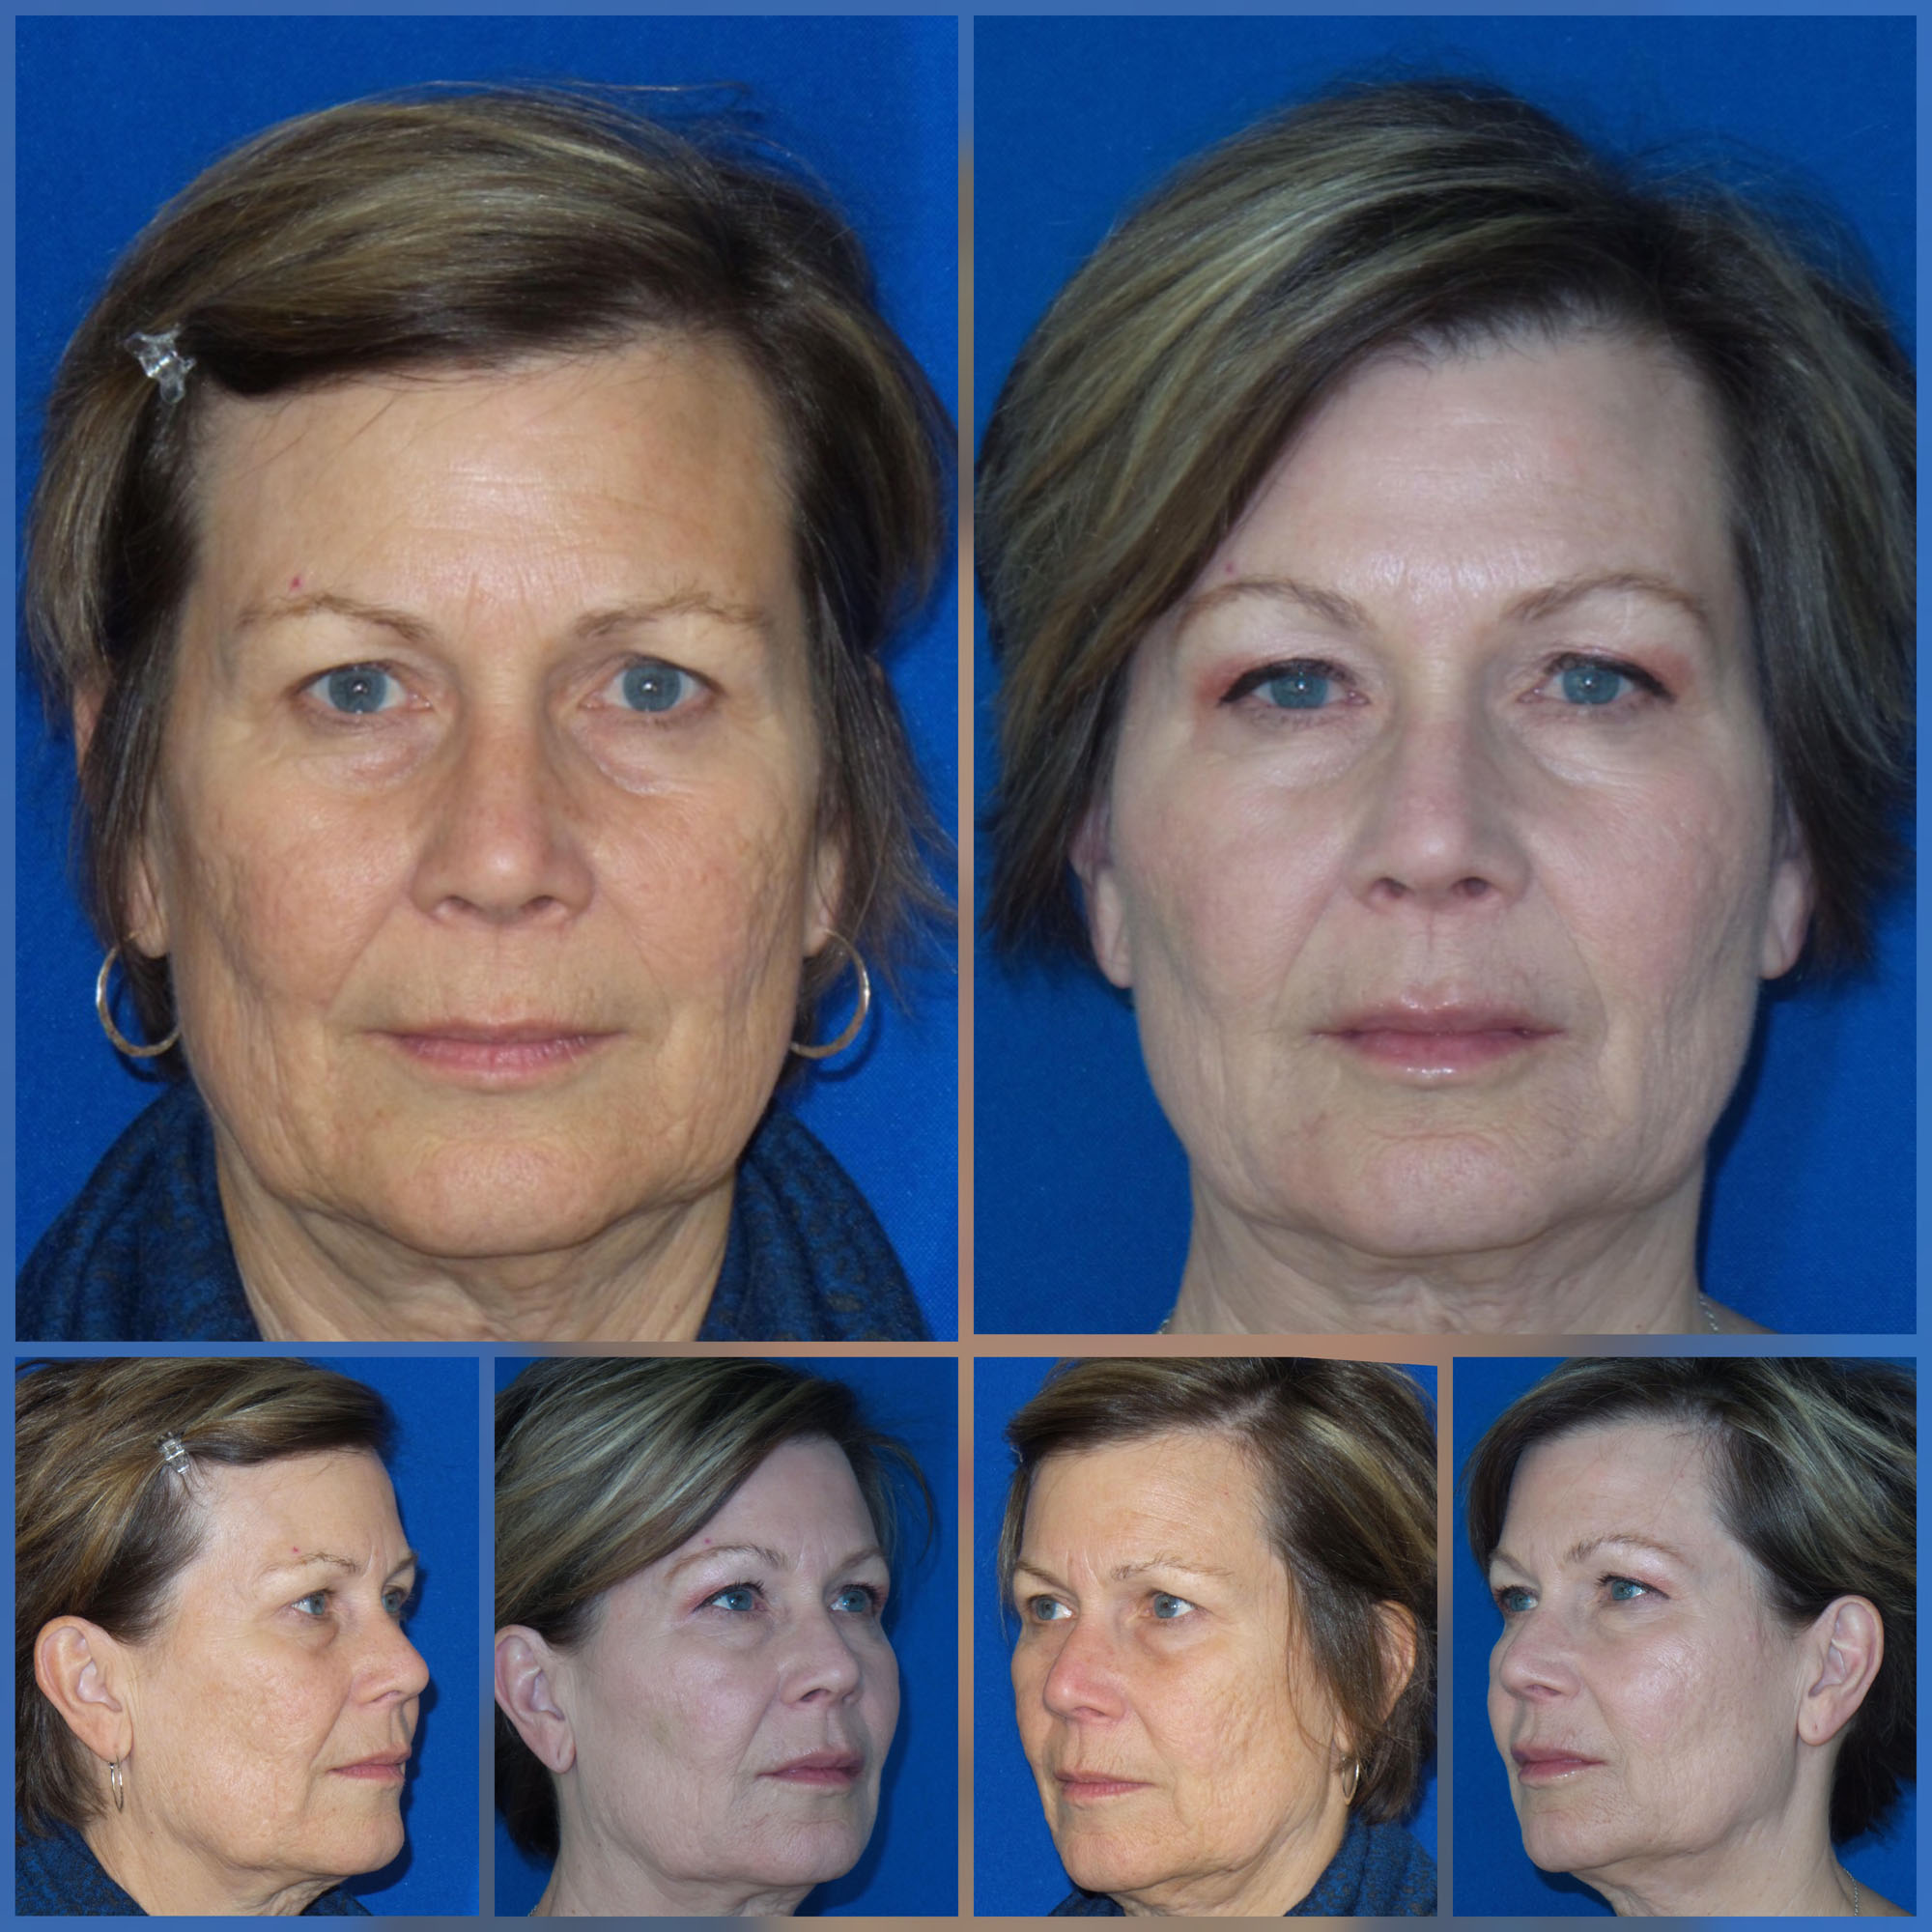 Mid & Full Face Filler Before and After photos from Refresh Aesthetic Center in Whitefish Bay WI